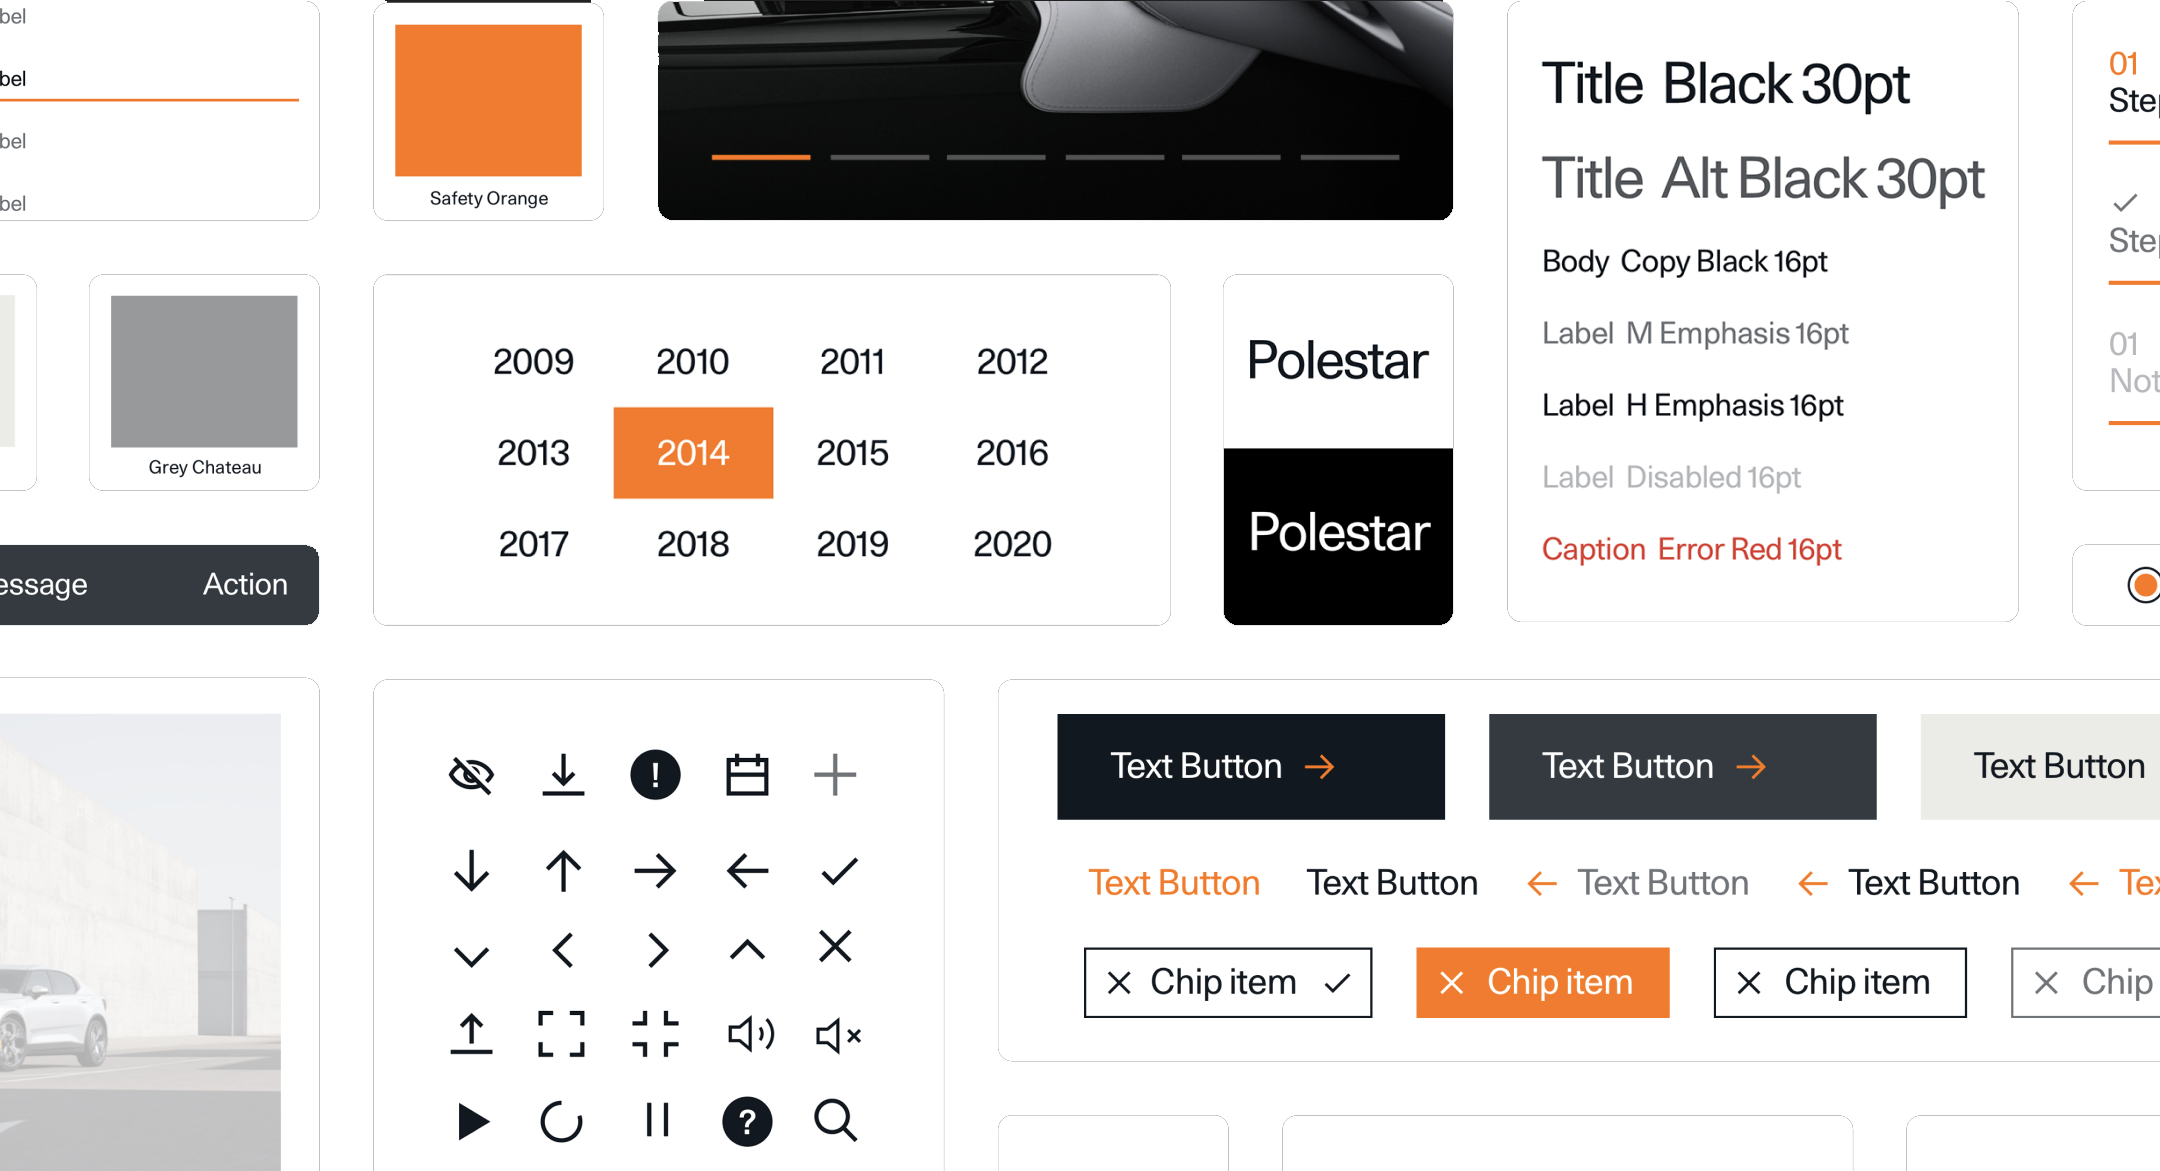 Grid with various examples of the style elements used for Polestar, such as; colour examples of oragnge and grey, various buttons, icons, font and fontsizes.